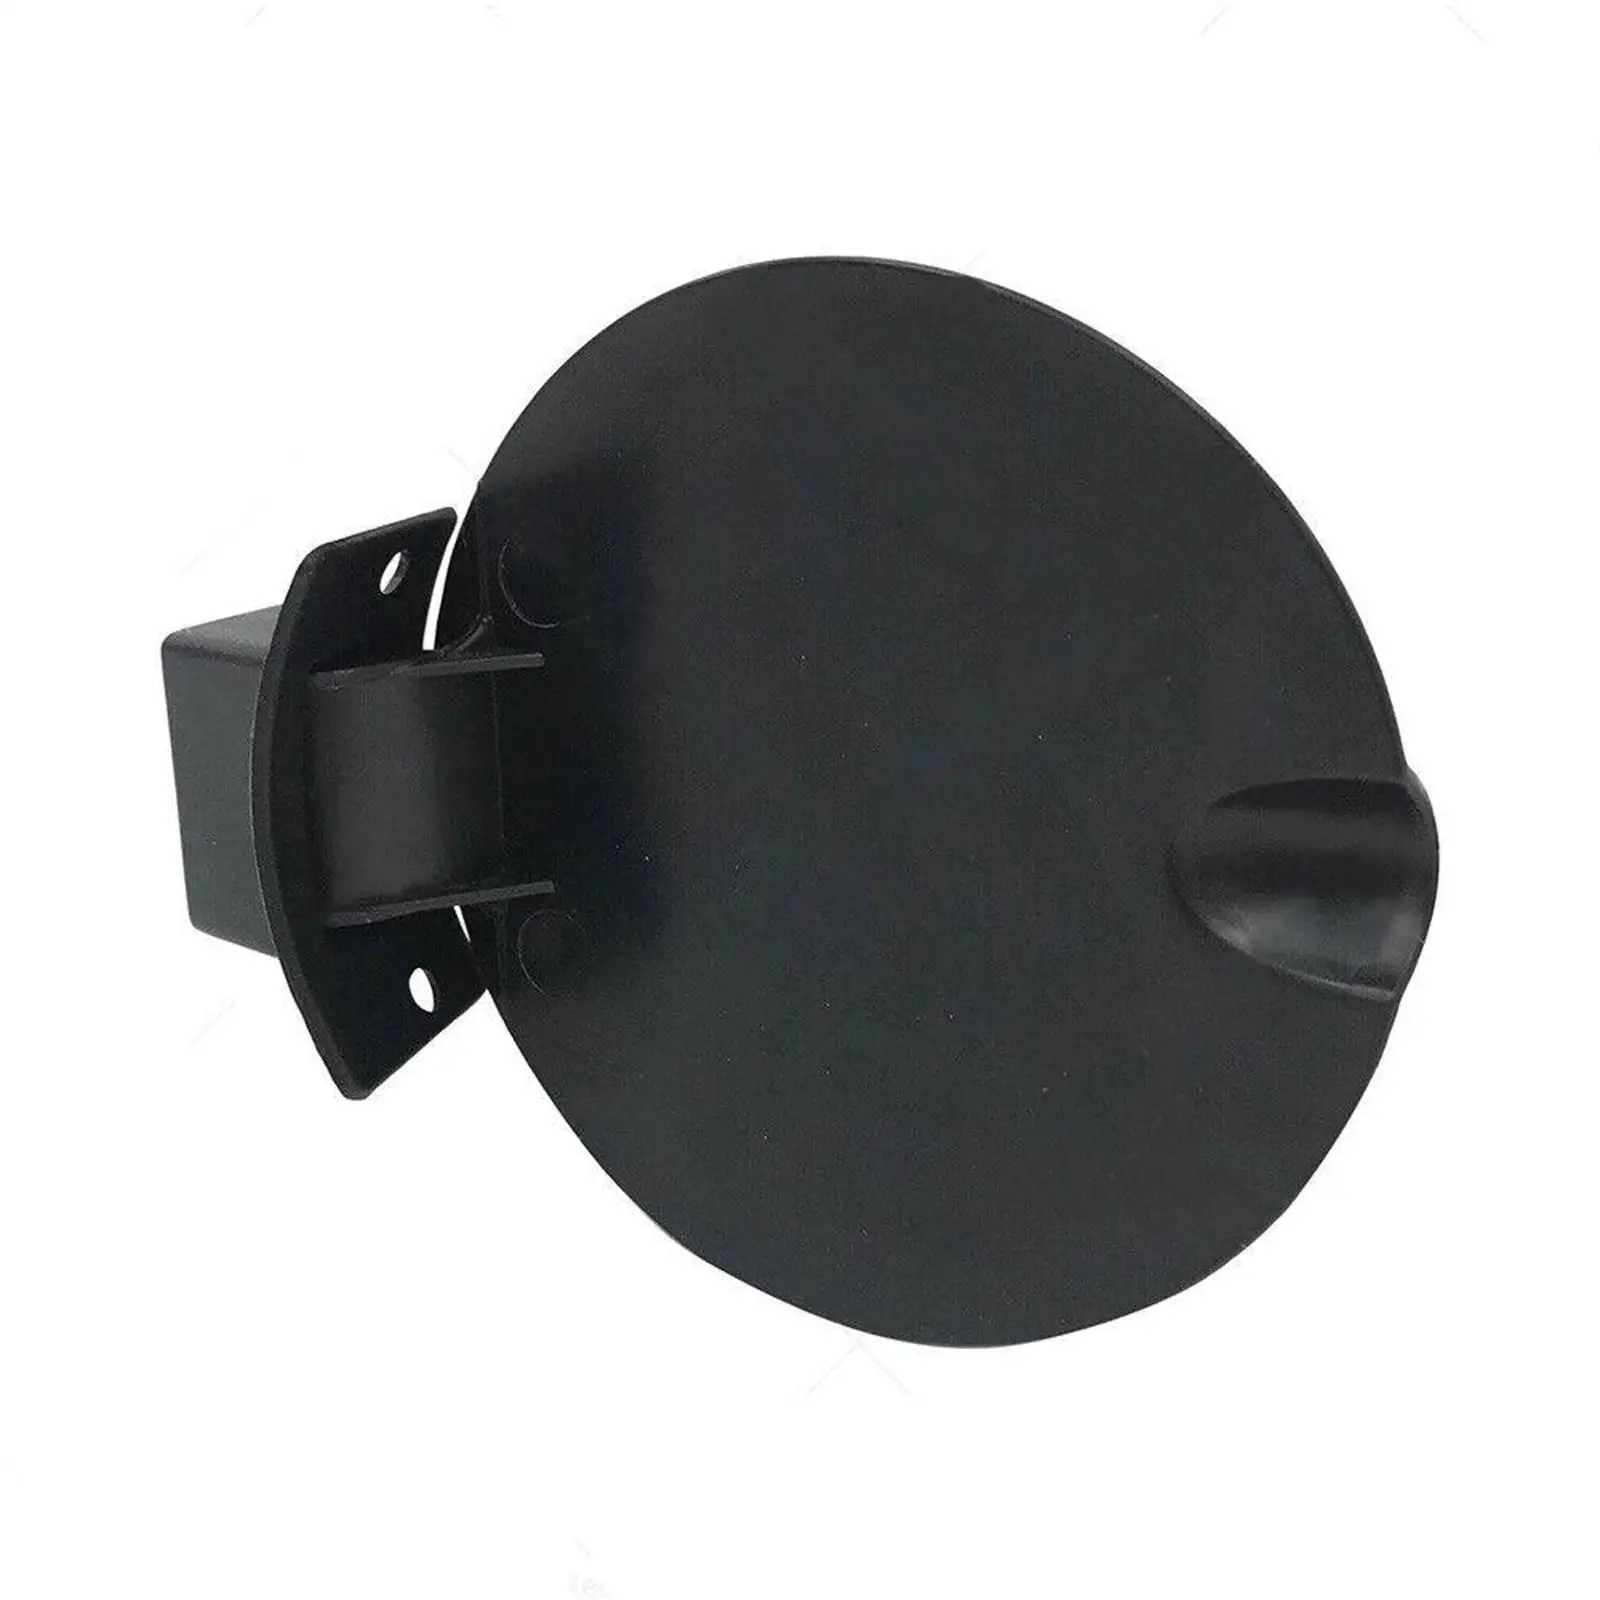 Fuel Filler Flap Fuel Tank Cap Accessories Modification for Holden VU Vy Vz Ute 2000 to 2007 Professional